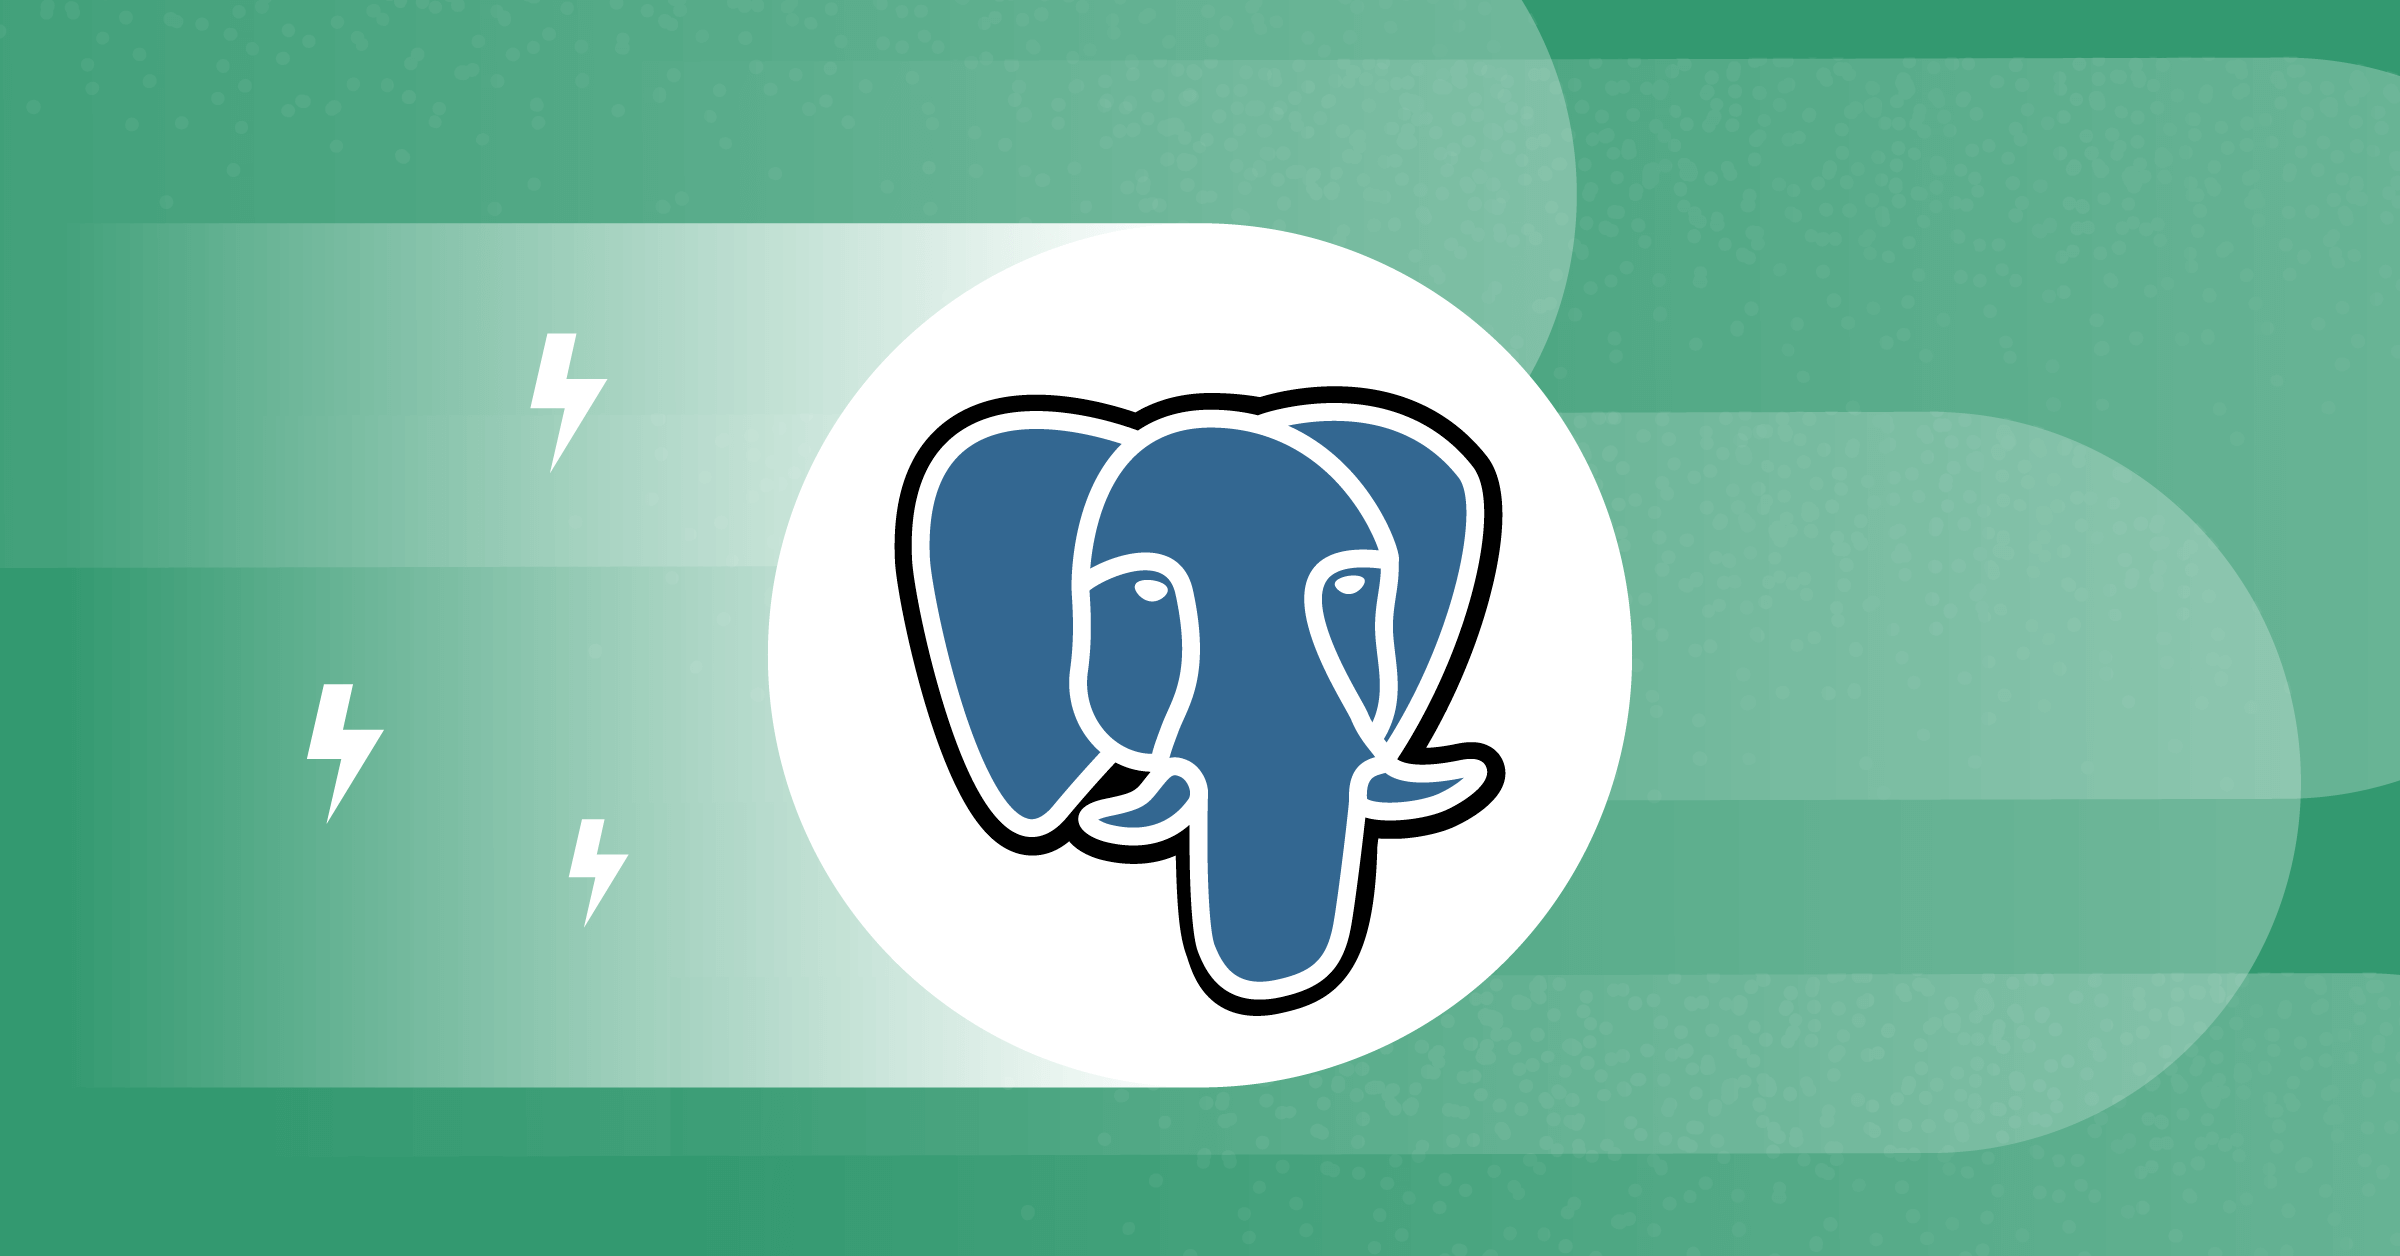 Making a Postgres query 1,000 times faster